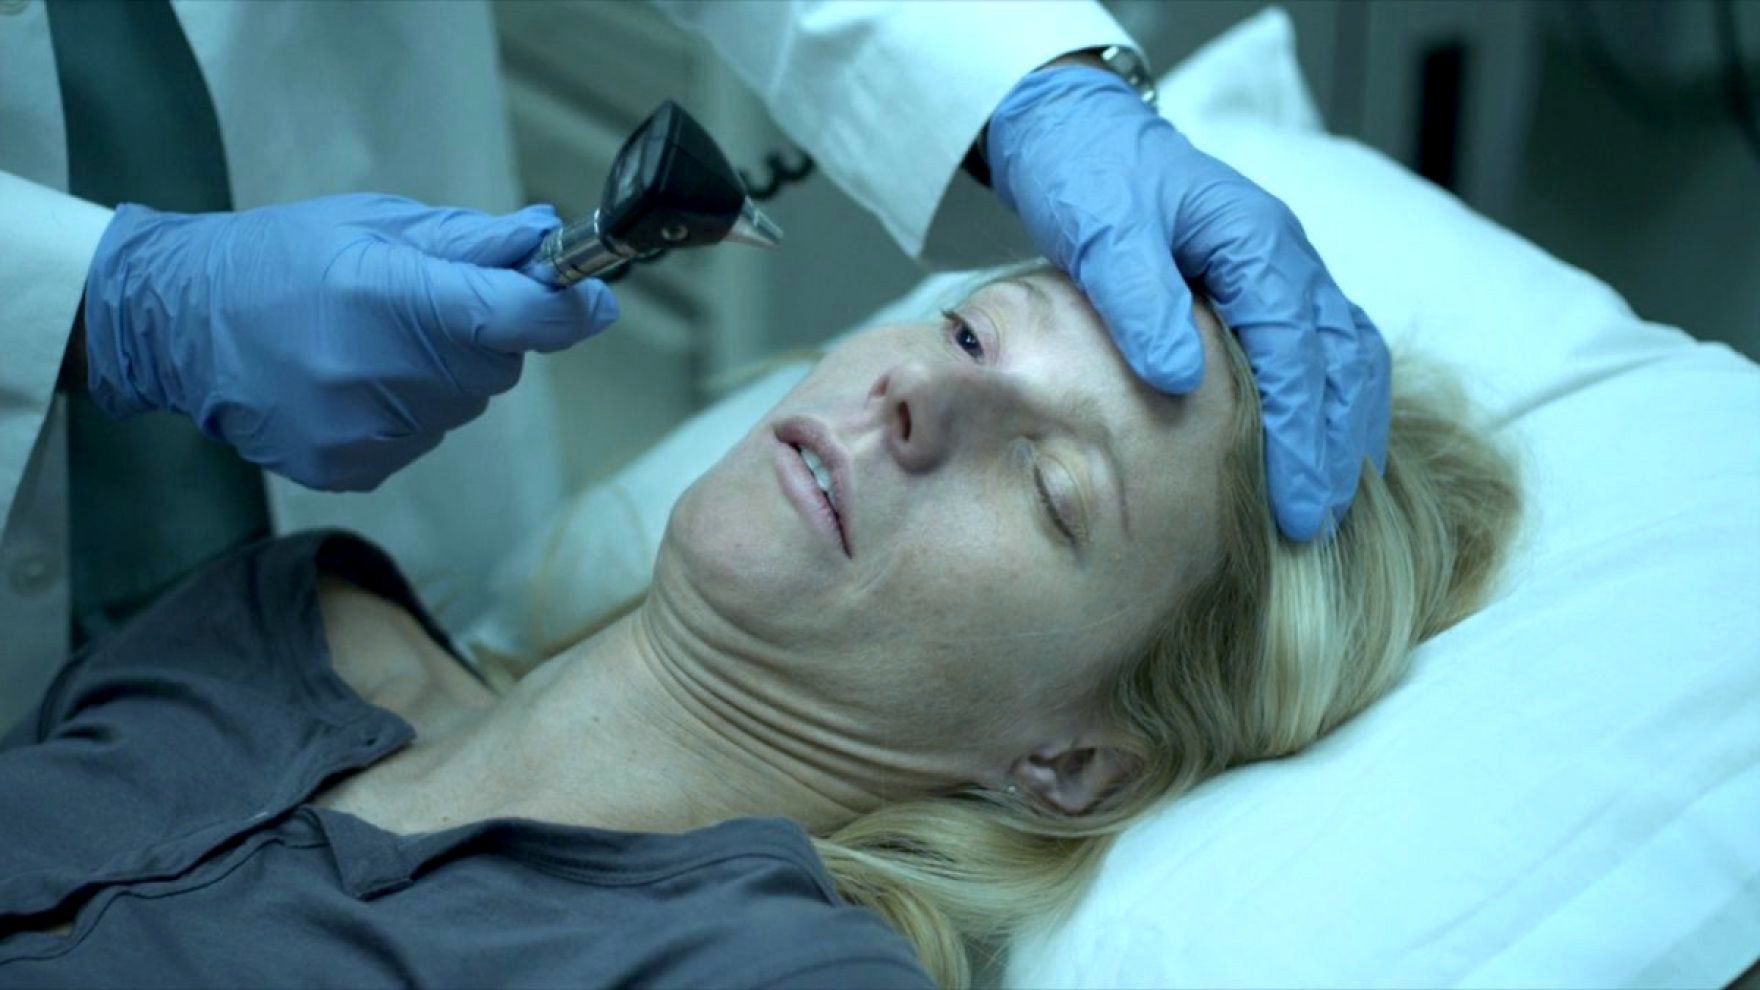 Gwyneth Paltrow lies on an exam table with one eye held open by a doctor in Contagion.